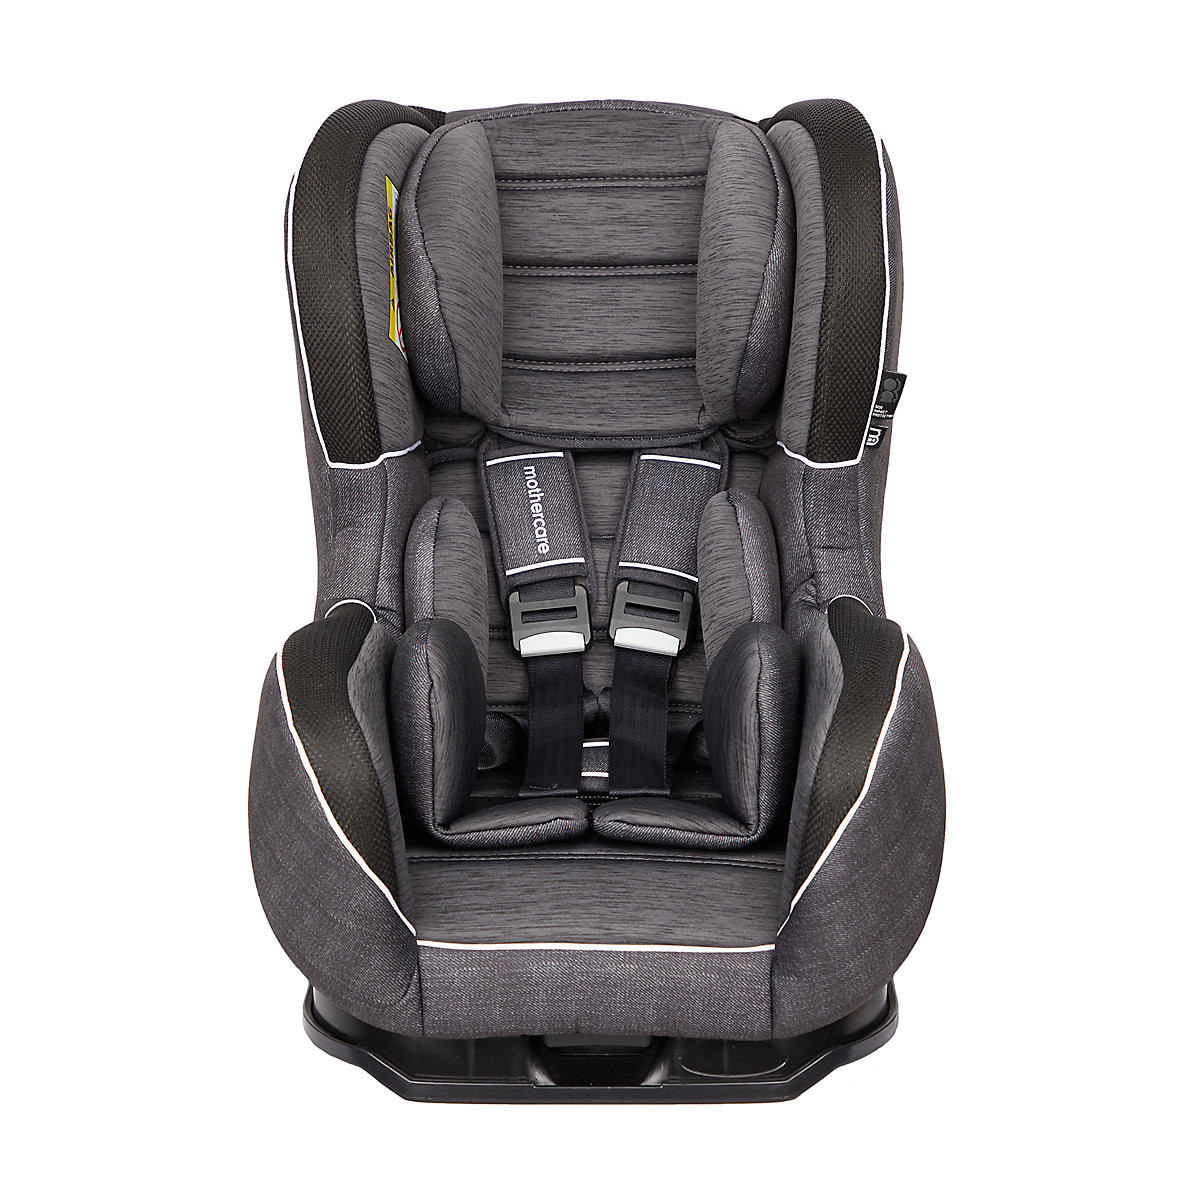 Mothercare Vienna sp baby car  seat  Reviews 